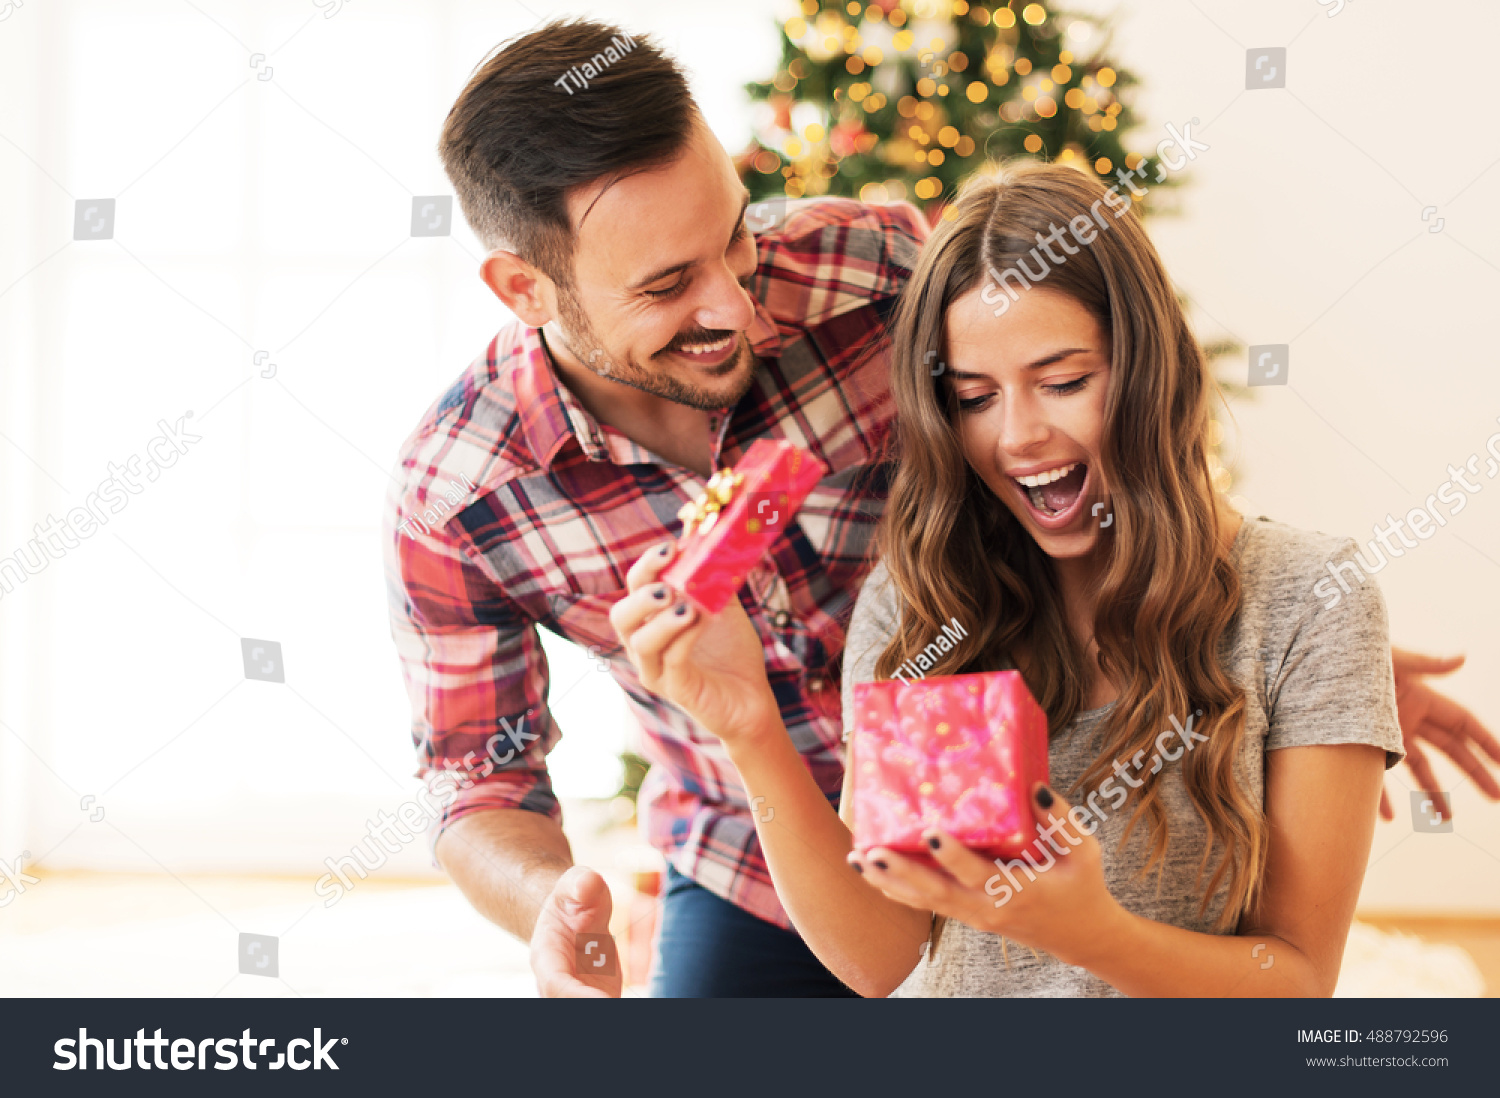 Man giving a Christmas present to his girlfriend #488792596